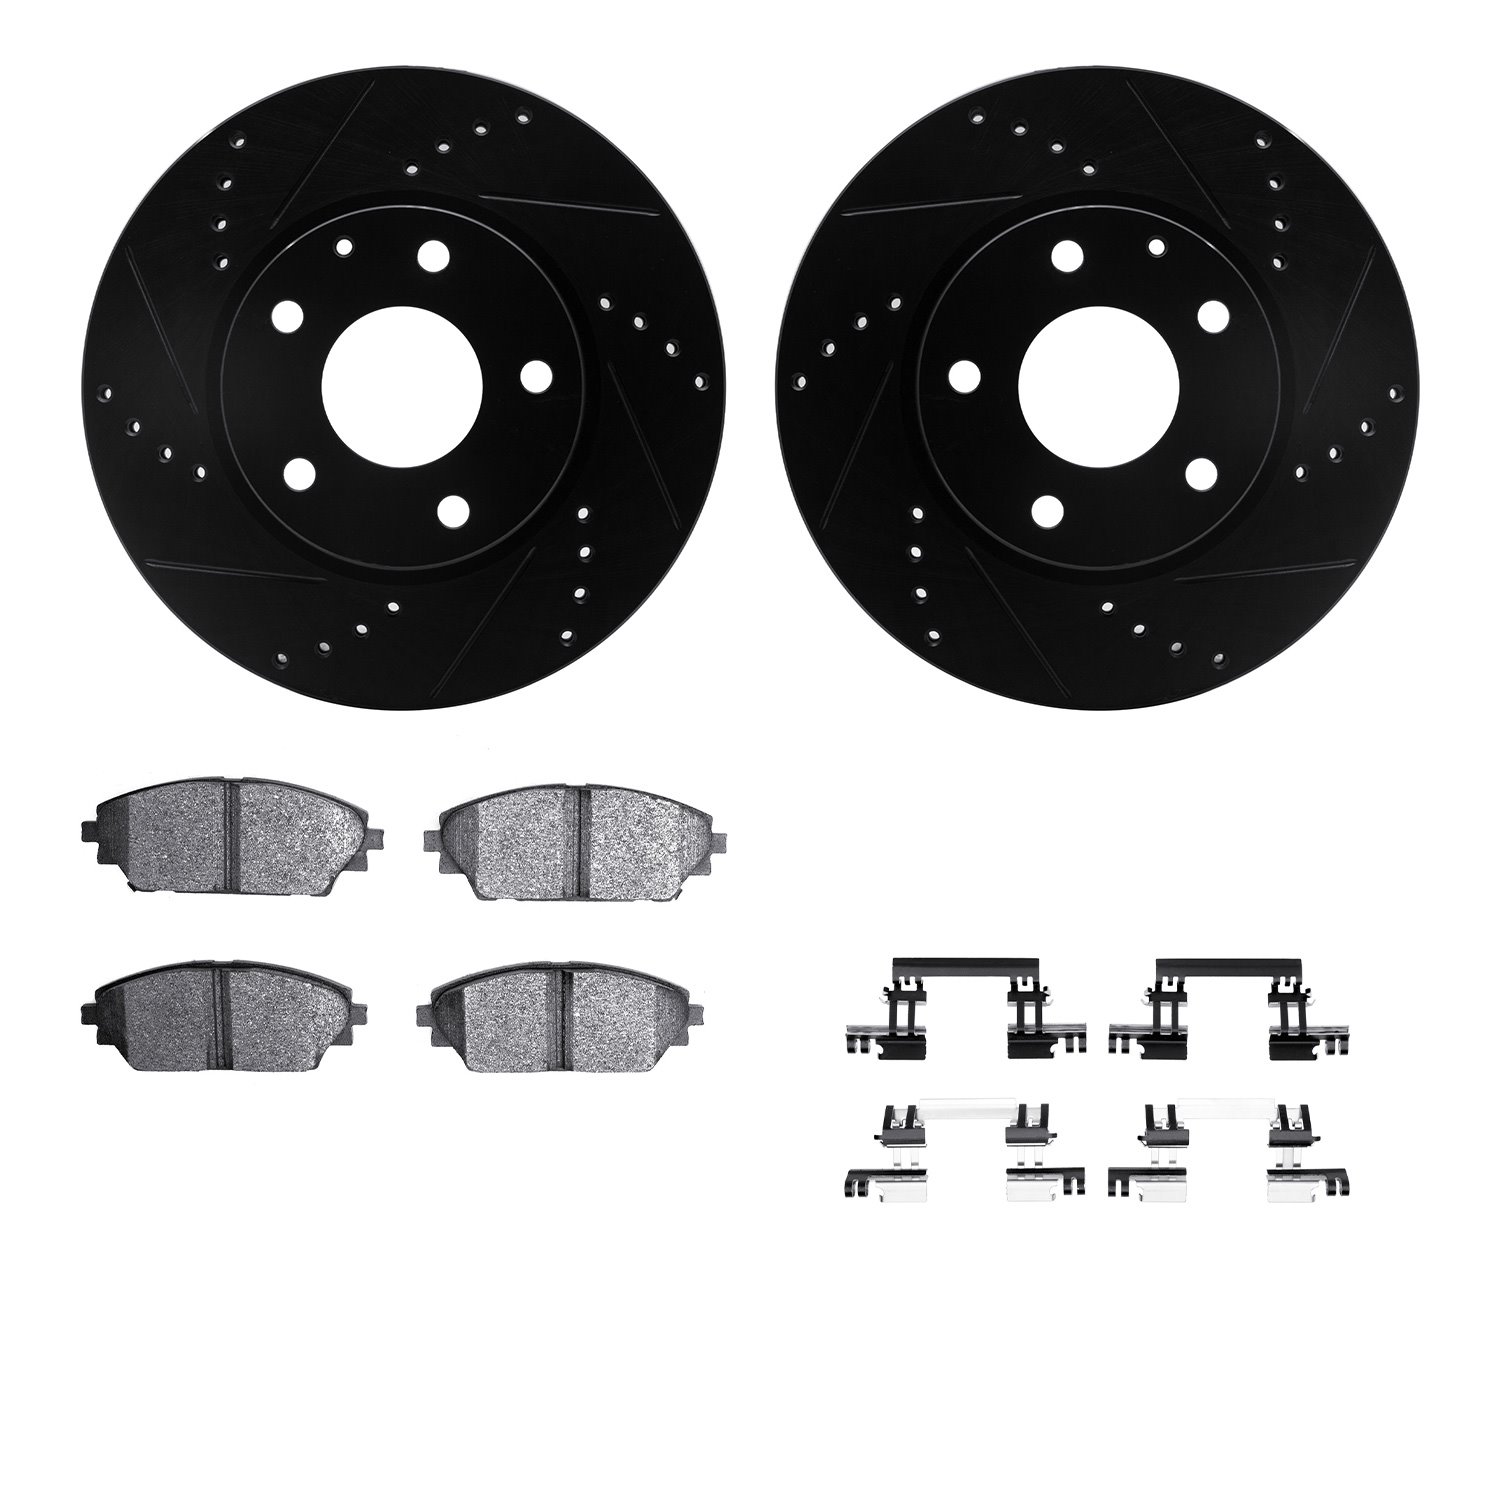 8312-80081 Drilled/Slotted Brake Rotors with 3000-Series Ceramic Brake Pads Kit & Hardware [Black], Fits Select Ford/Lincoln/Mer